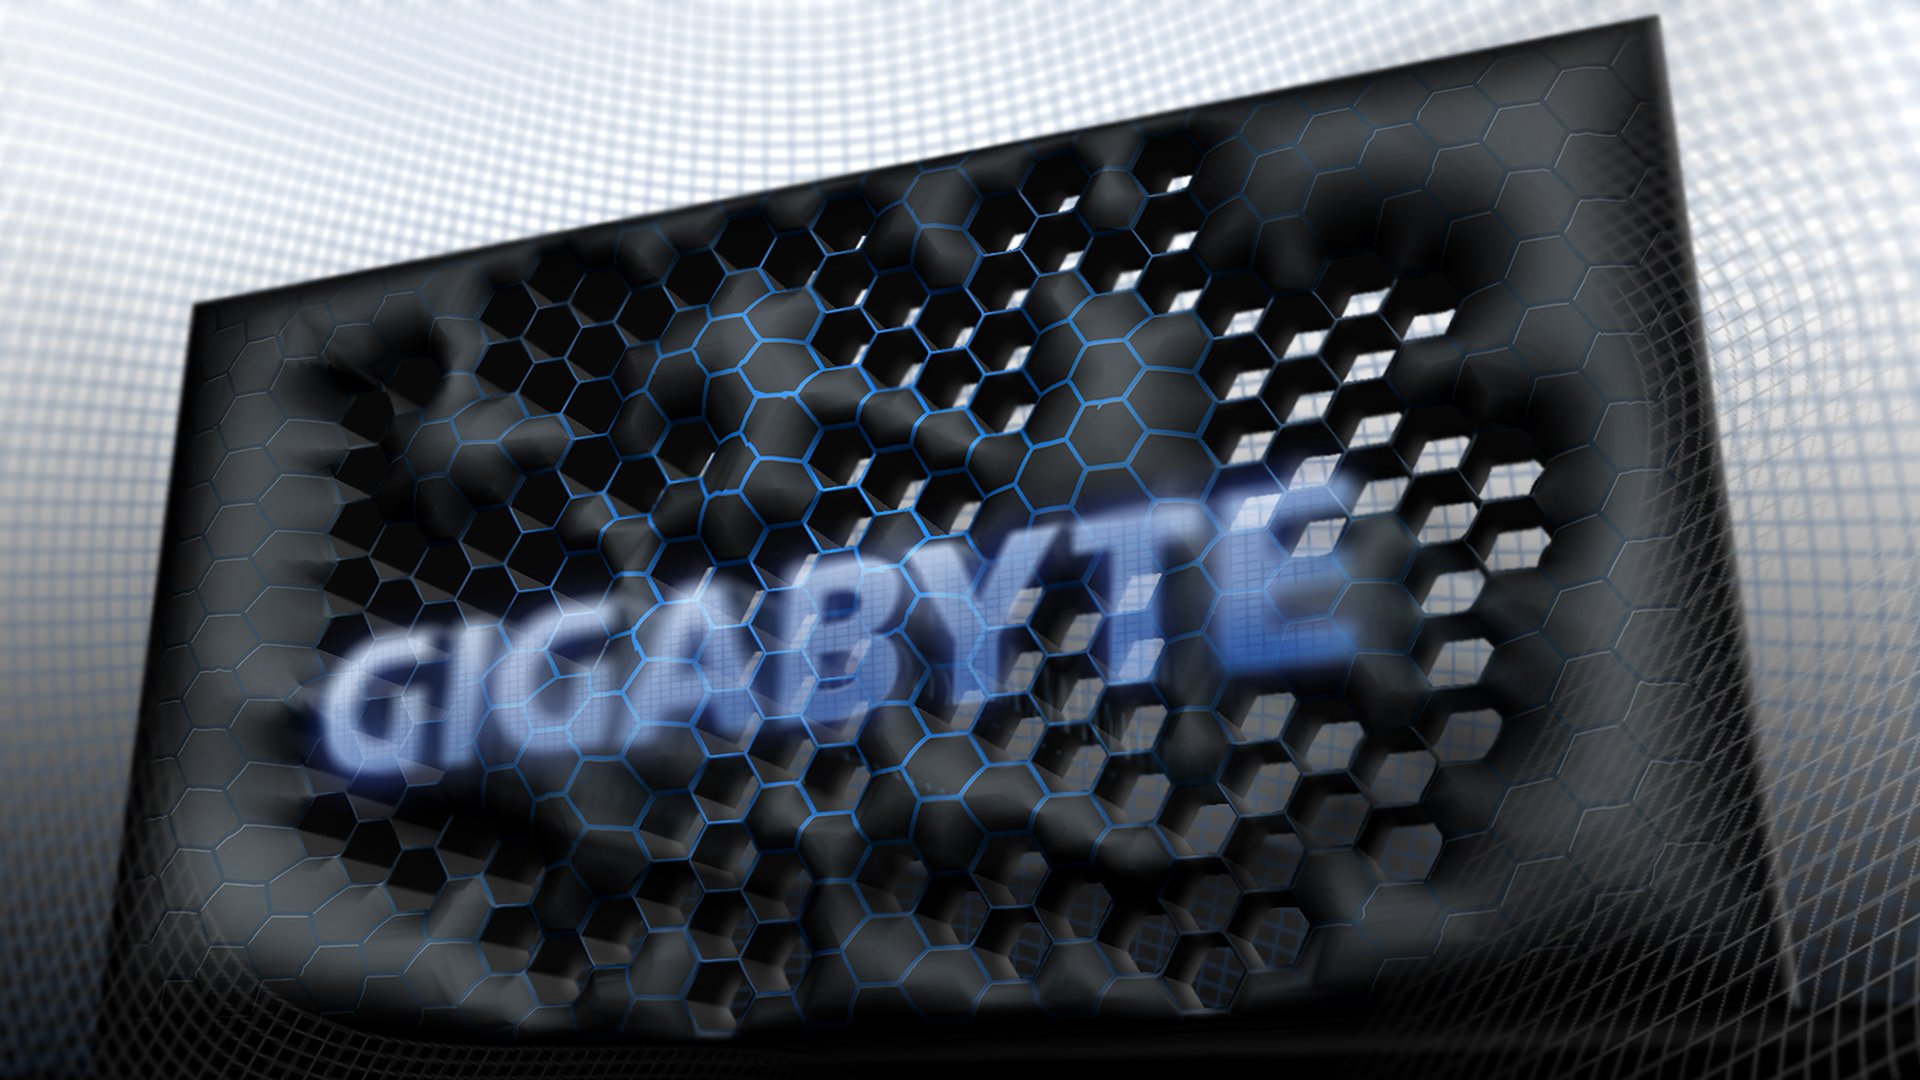 Gigabyte Motherboard 3D HD Wallpapers and Backgrounds